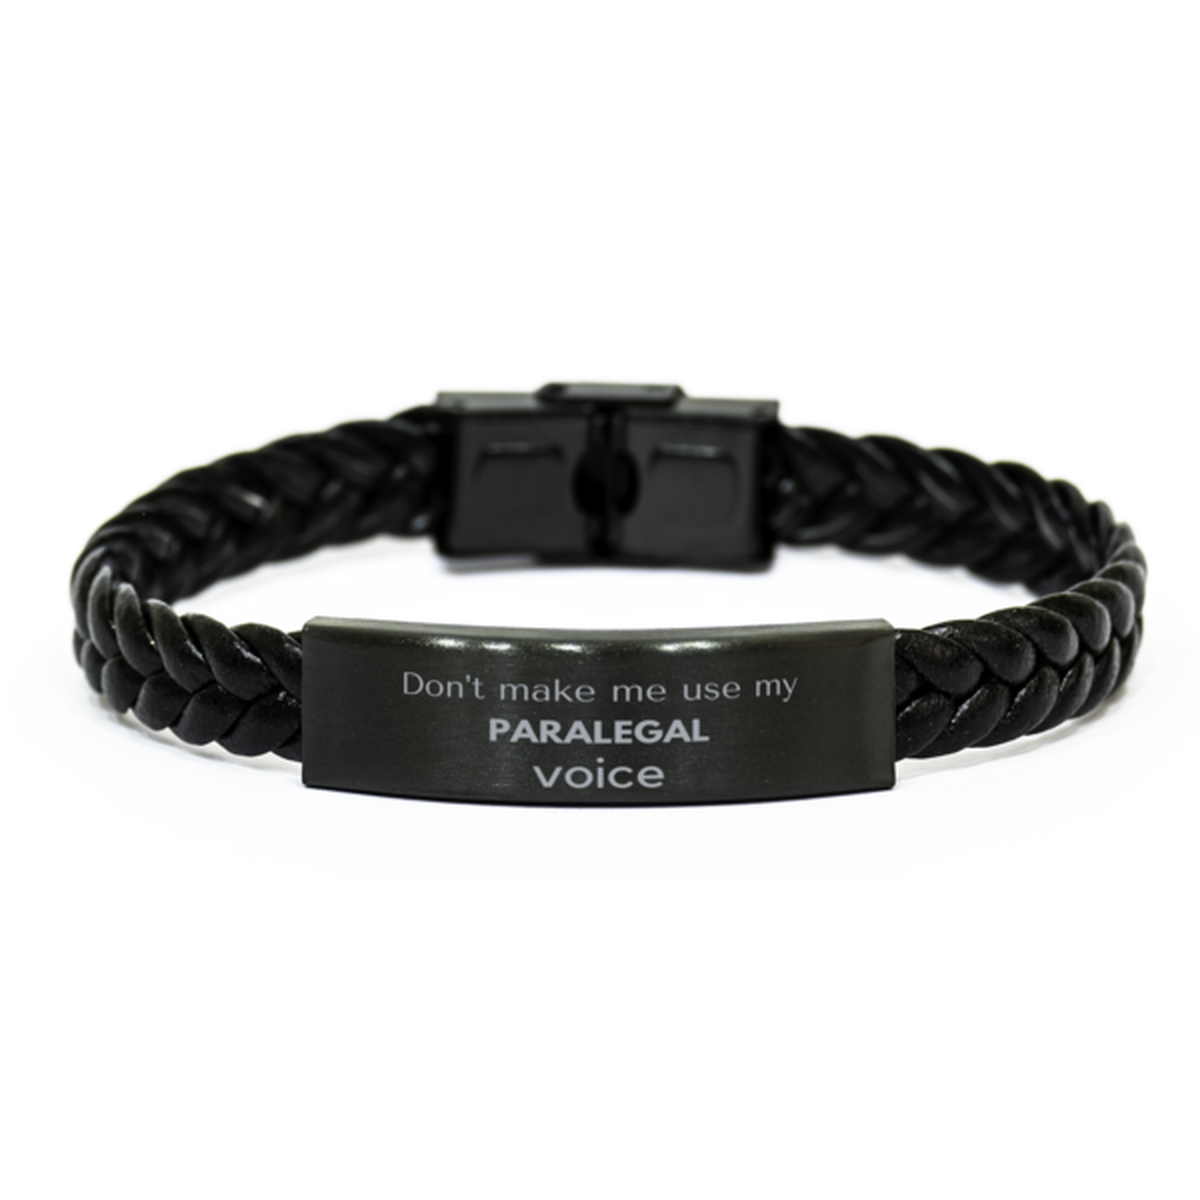 Don't make me use my Paralegal voice, Sarcasm Paralegal Gifts, Christmas Paralegal Braided Leather Bracelet Birthday Unique Gifts For Paralegal Coworkers, Men, Women, Colleague, Friends